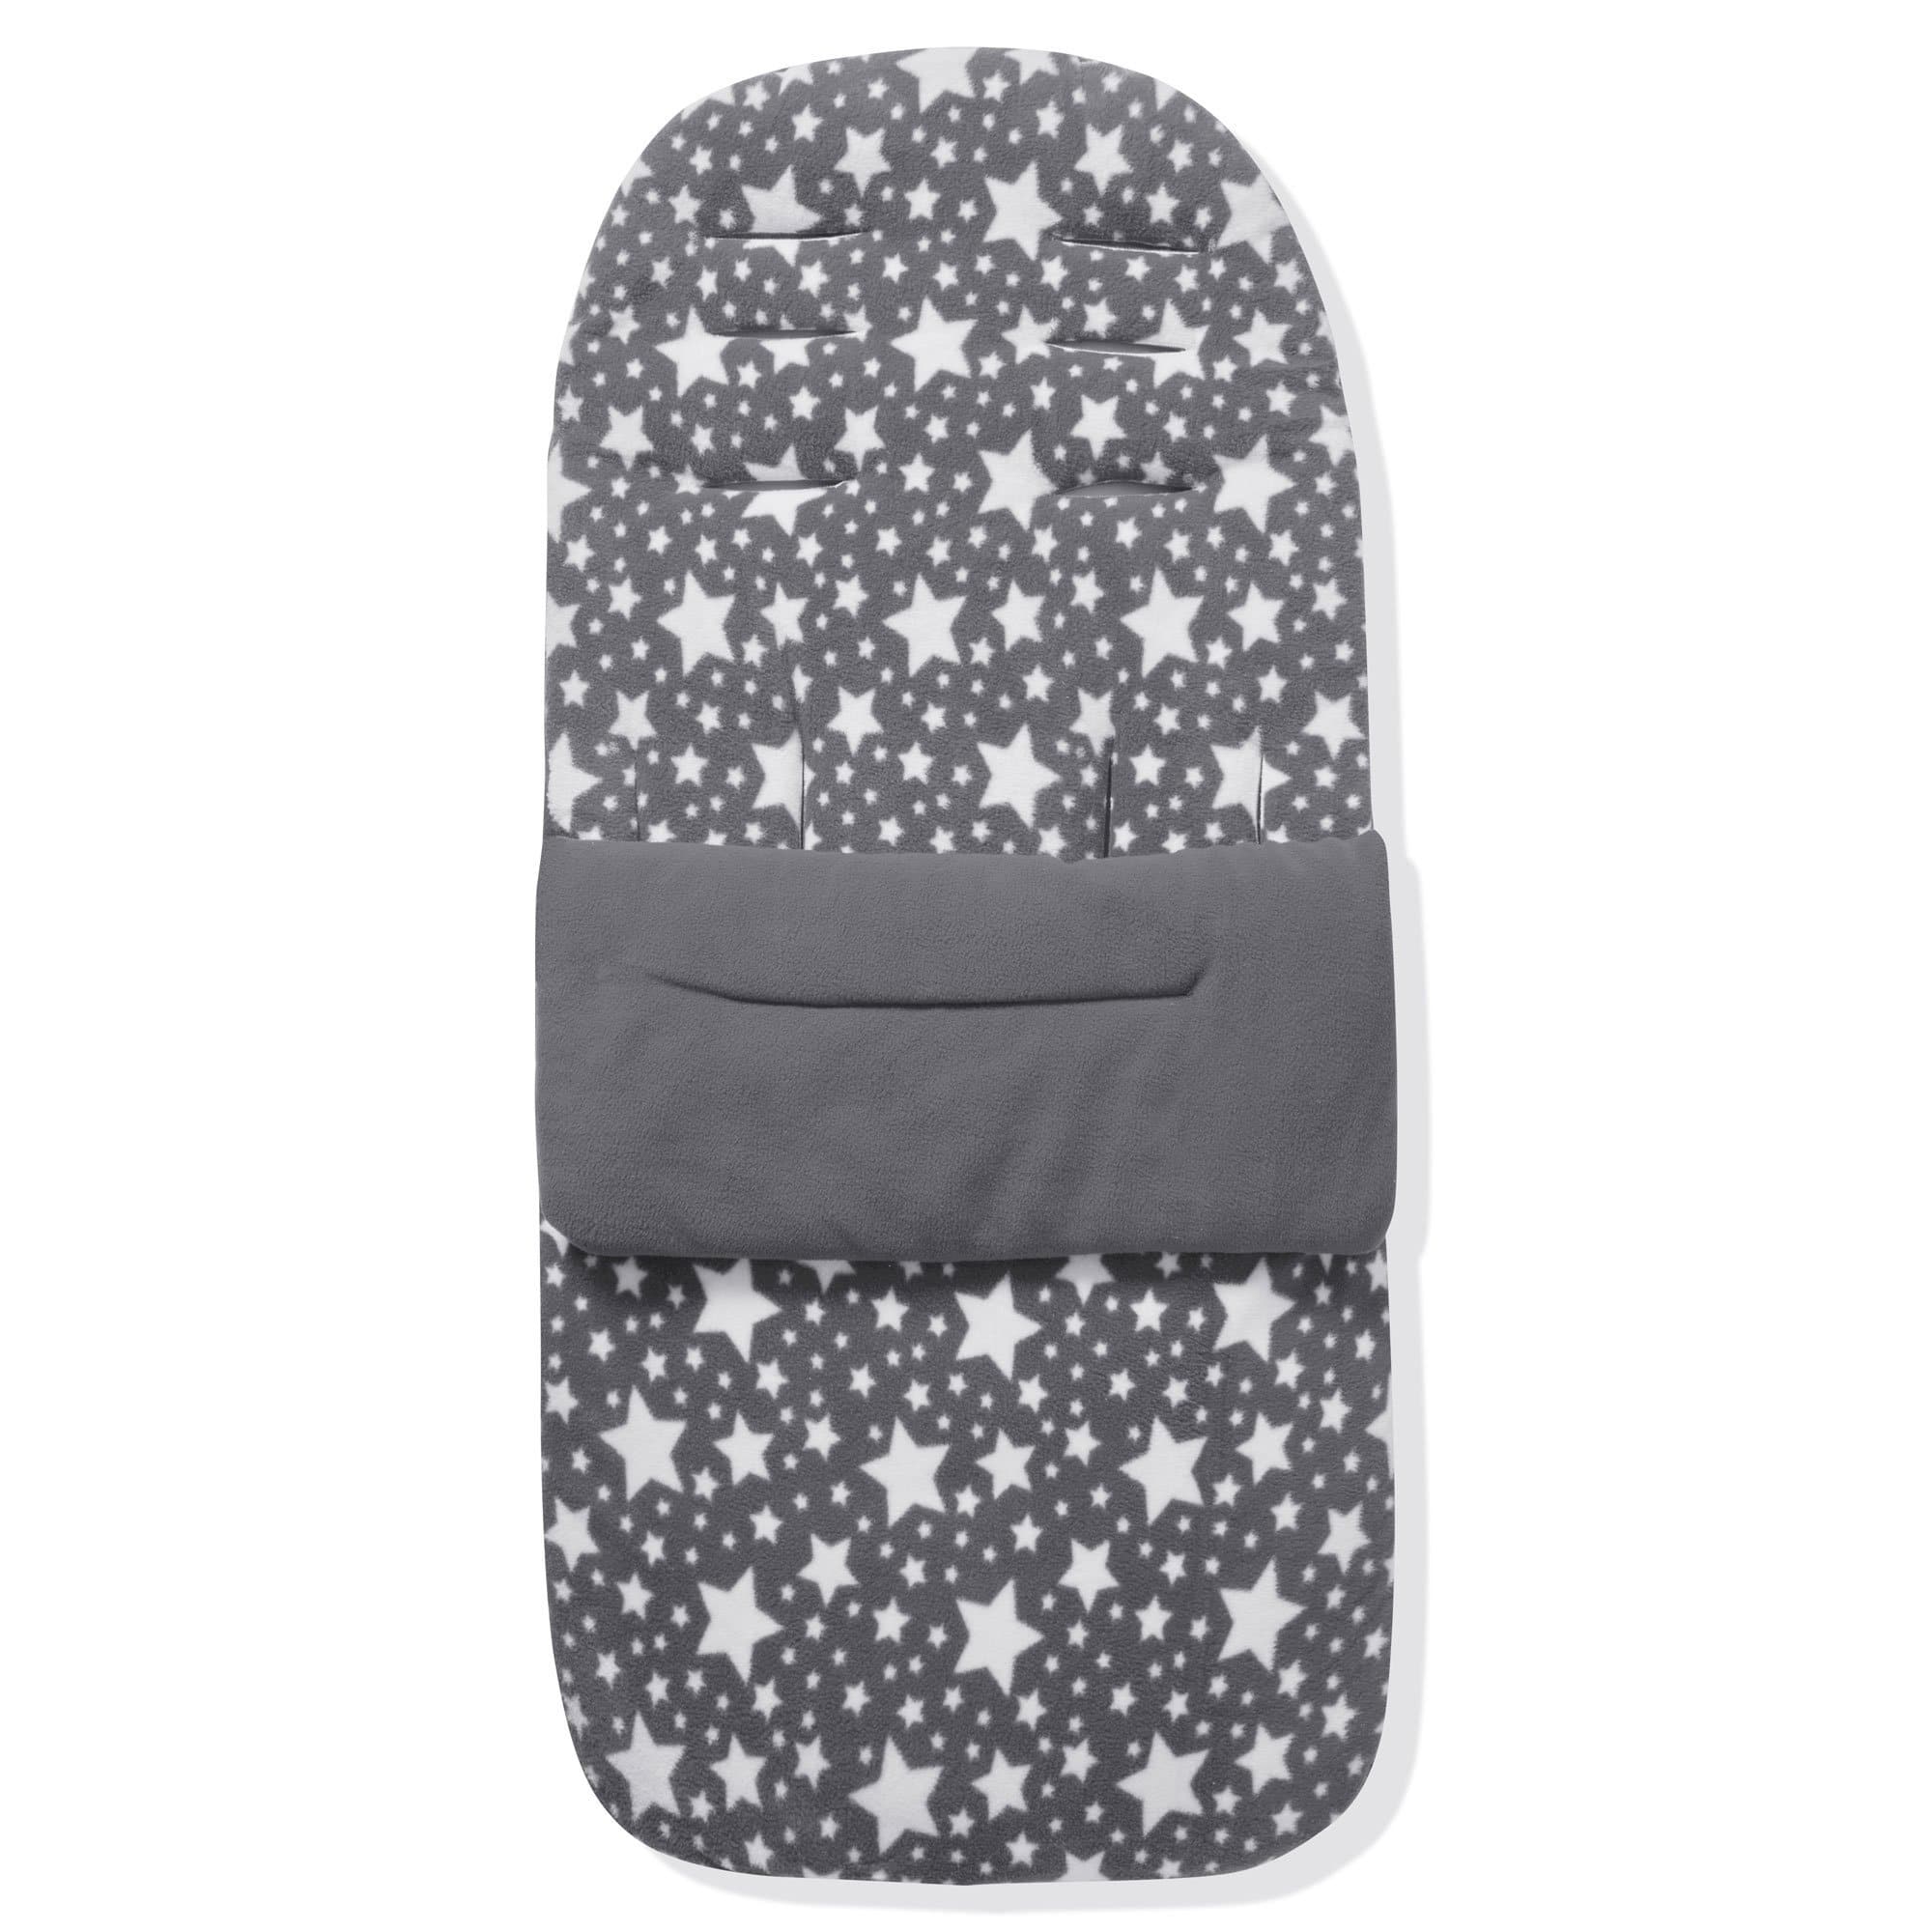 Fleece Footmuff / Cosy Toes Compatible with Quinny - For Your Little One